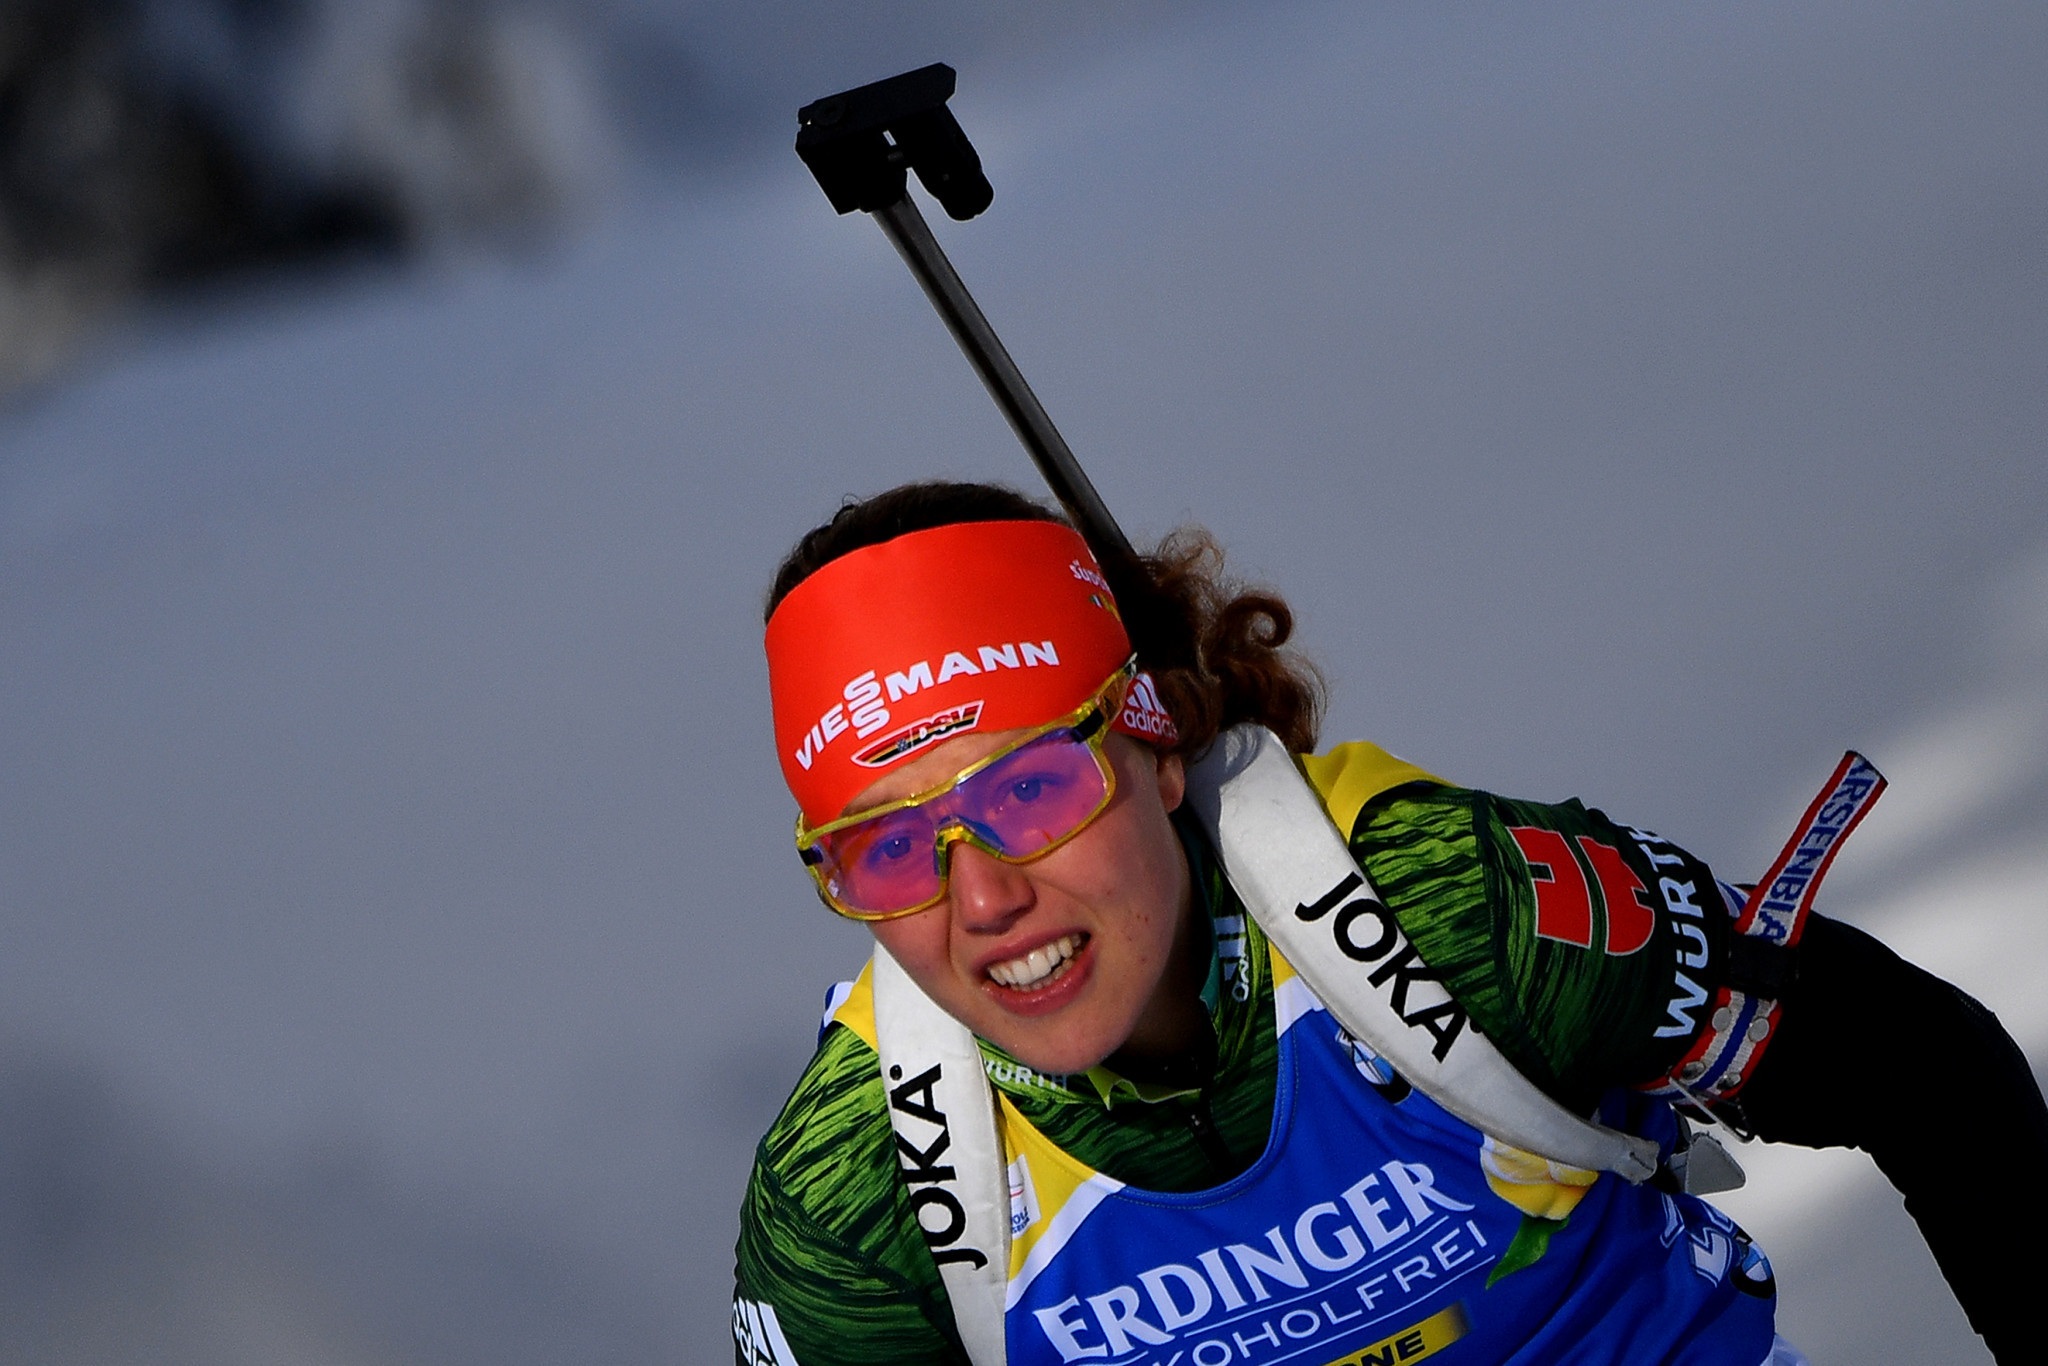 Defending World Cup champion Laura Dahlmeier claimed the silver medal ©Getty Images